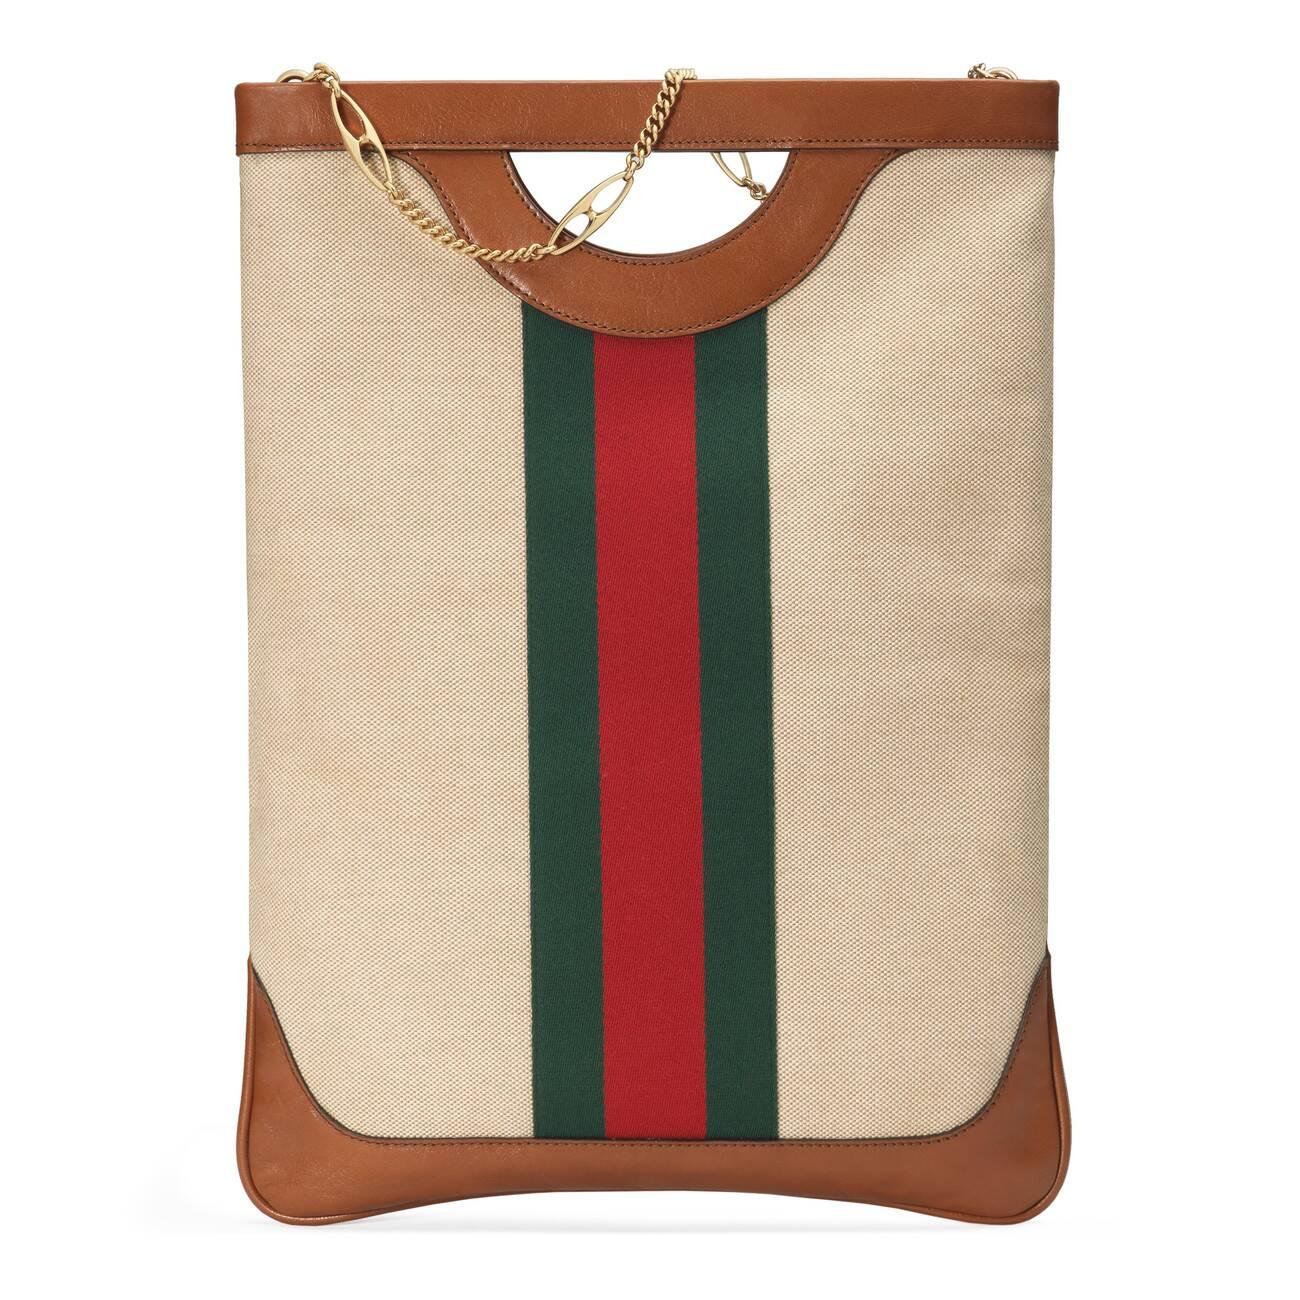 Gucci Large Vintage Canvas Tote in Natural | Lyst